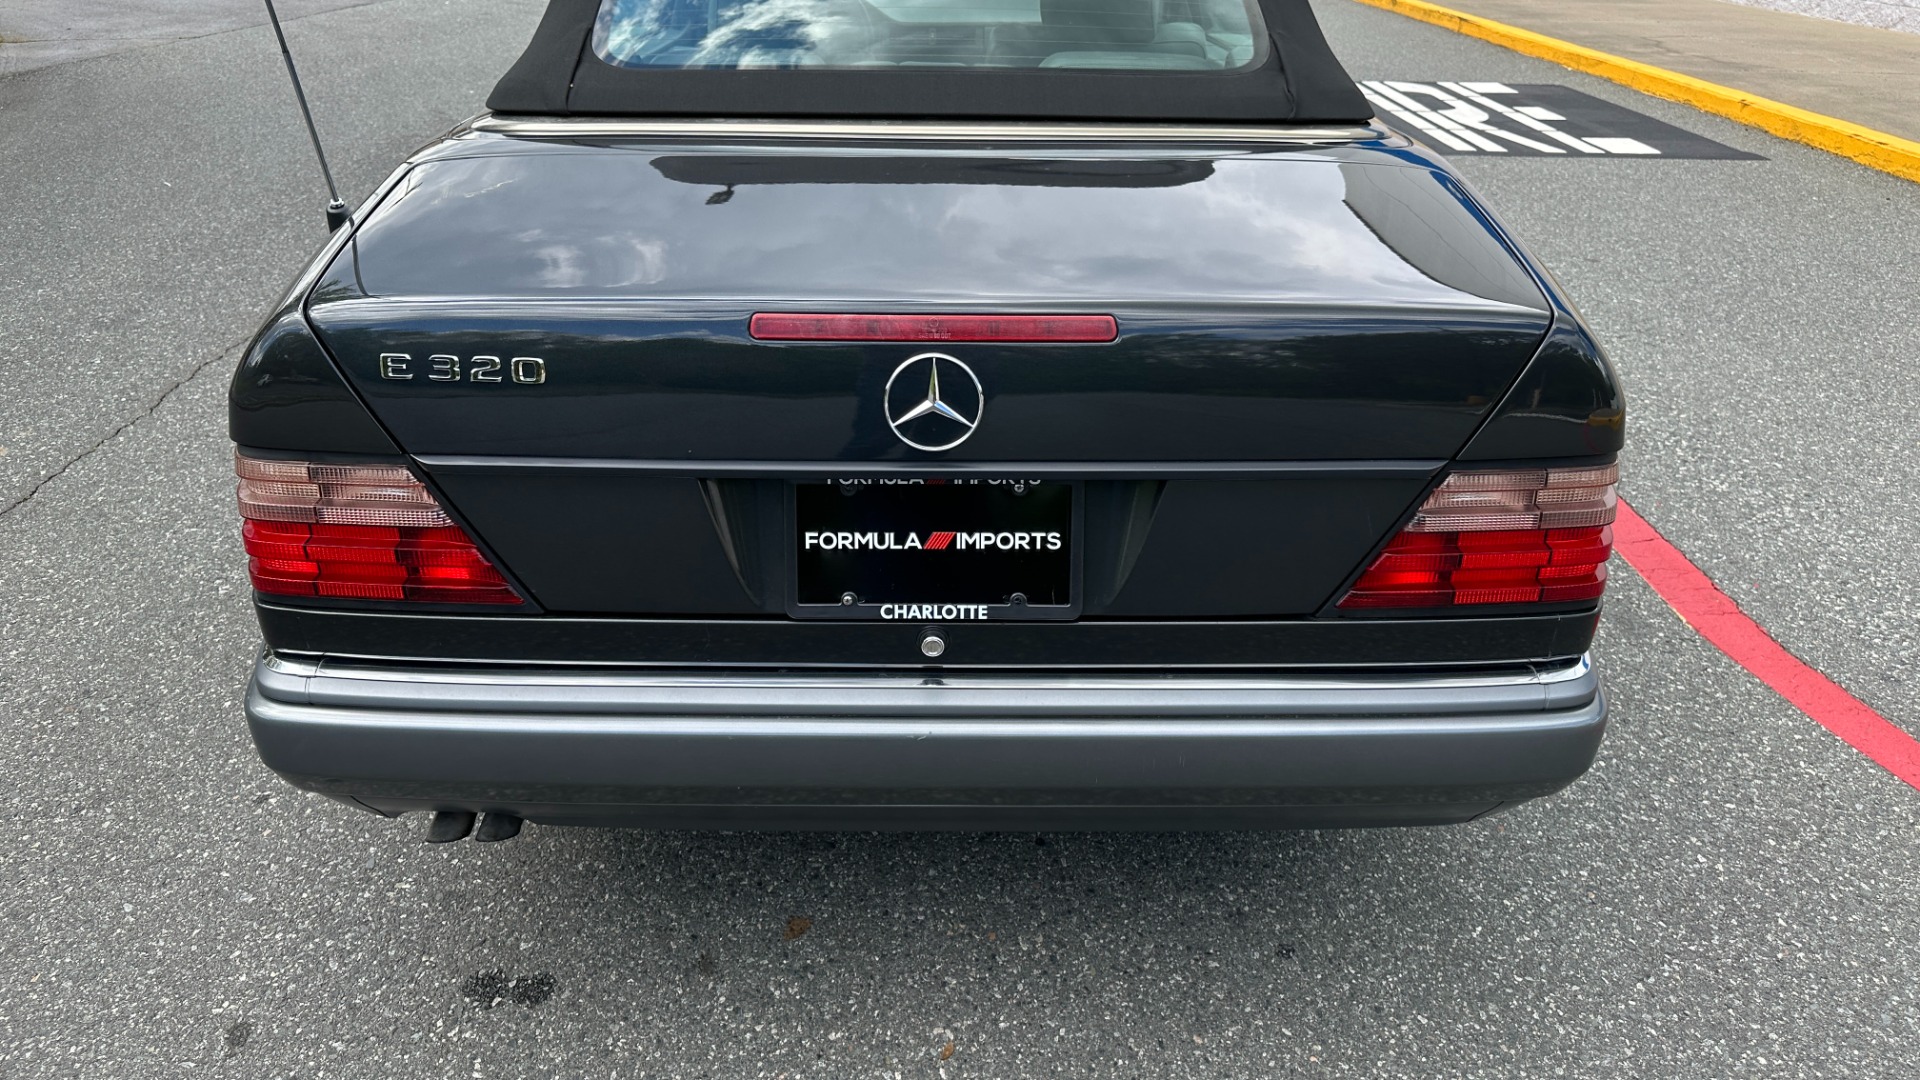 Used 1994 Mercedes-Benz 300 Series E 320 / CONVERTIBLE / MEMORY / POWER TOP / INLINE 6CYL / LEATHER for sale $17,000 at Formula Imports in Charlotte NC 28227 10